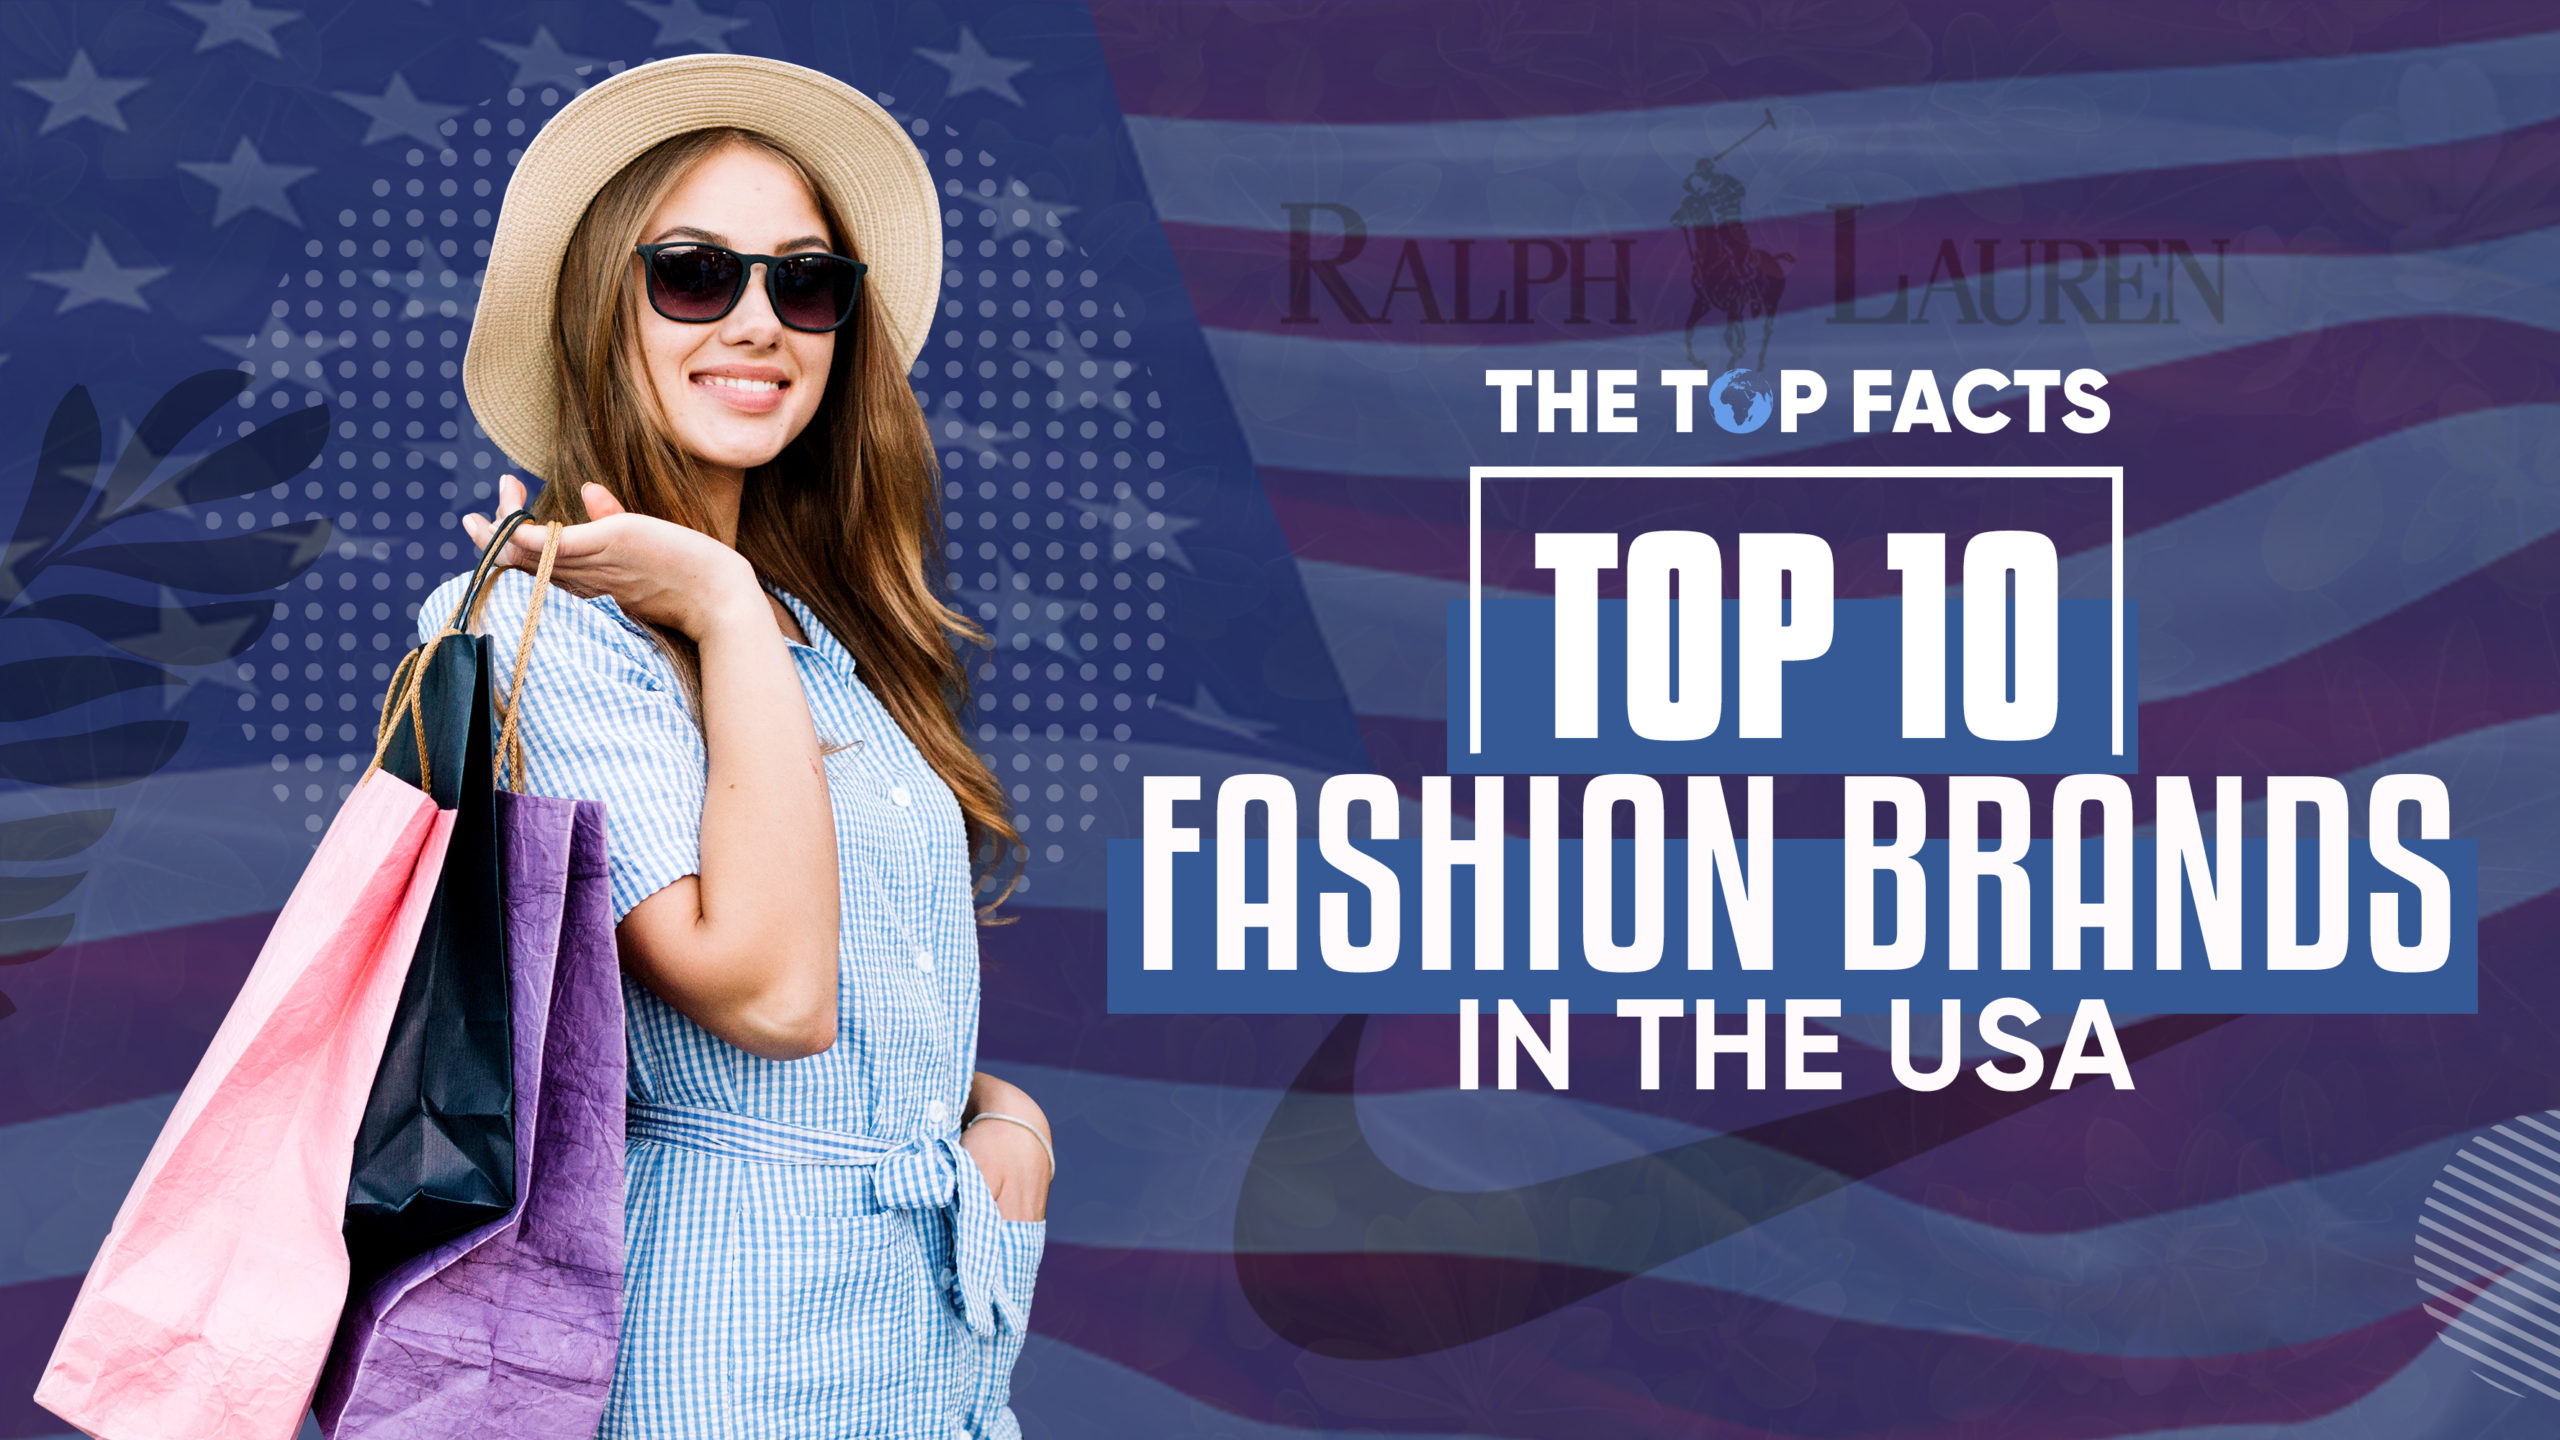 Fashion Brands Top 10 Fashion Bradsn in the US the Top Facts